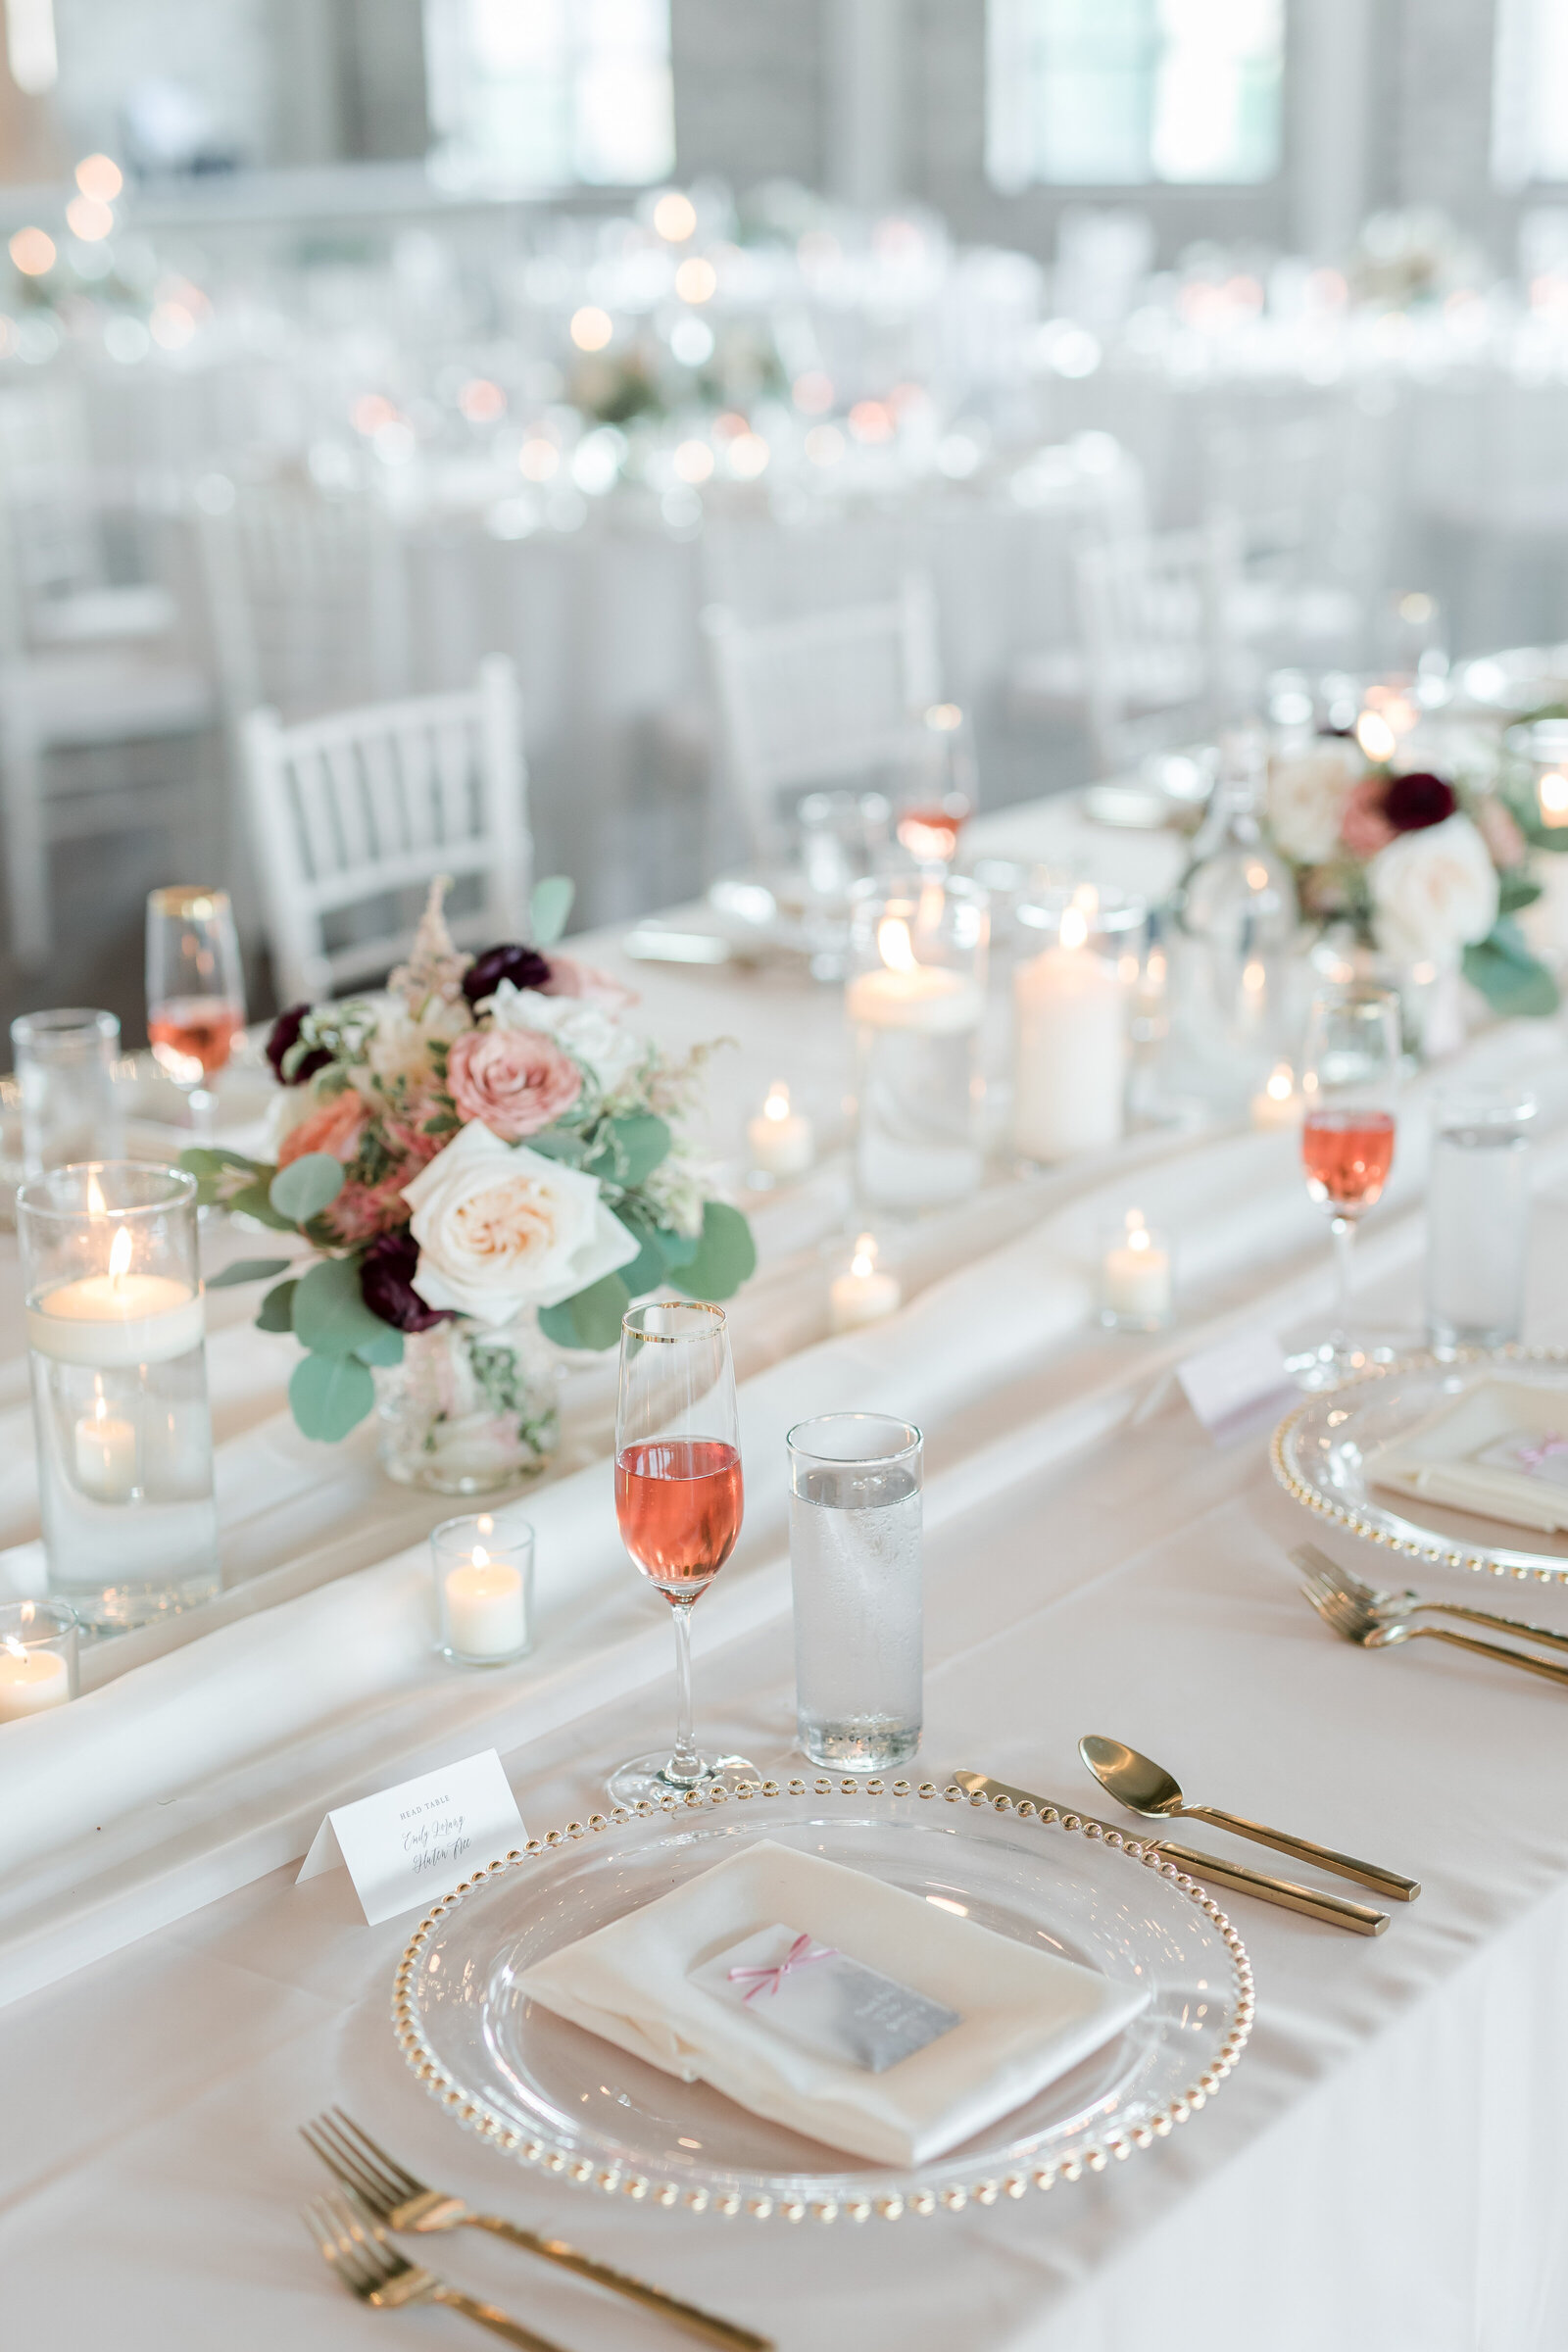 White table dressings for a wedding